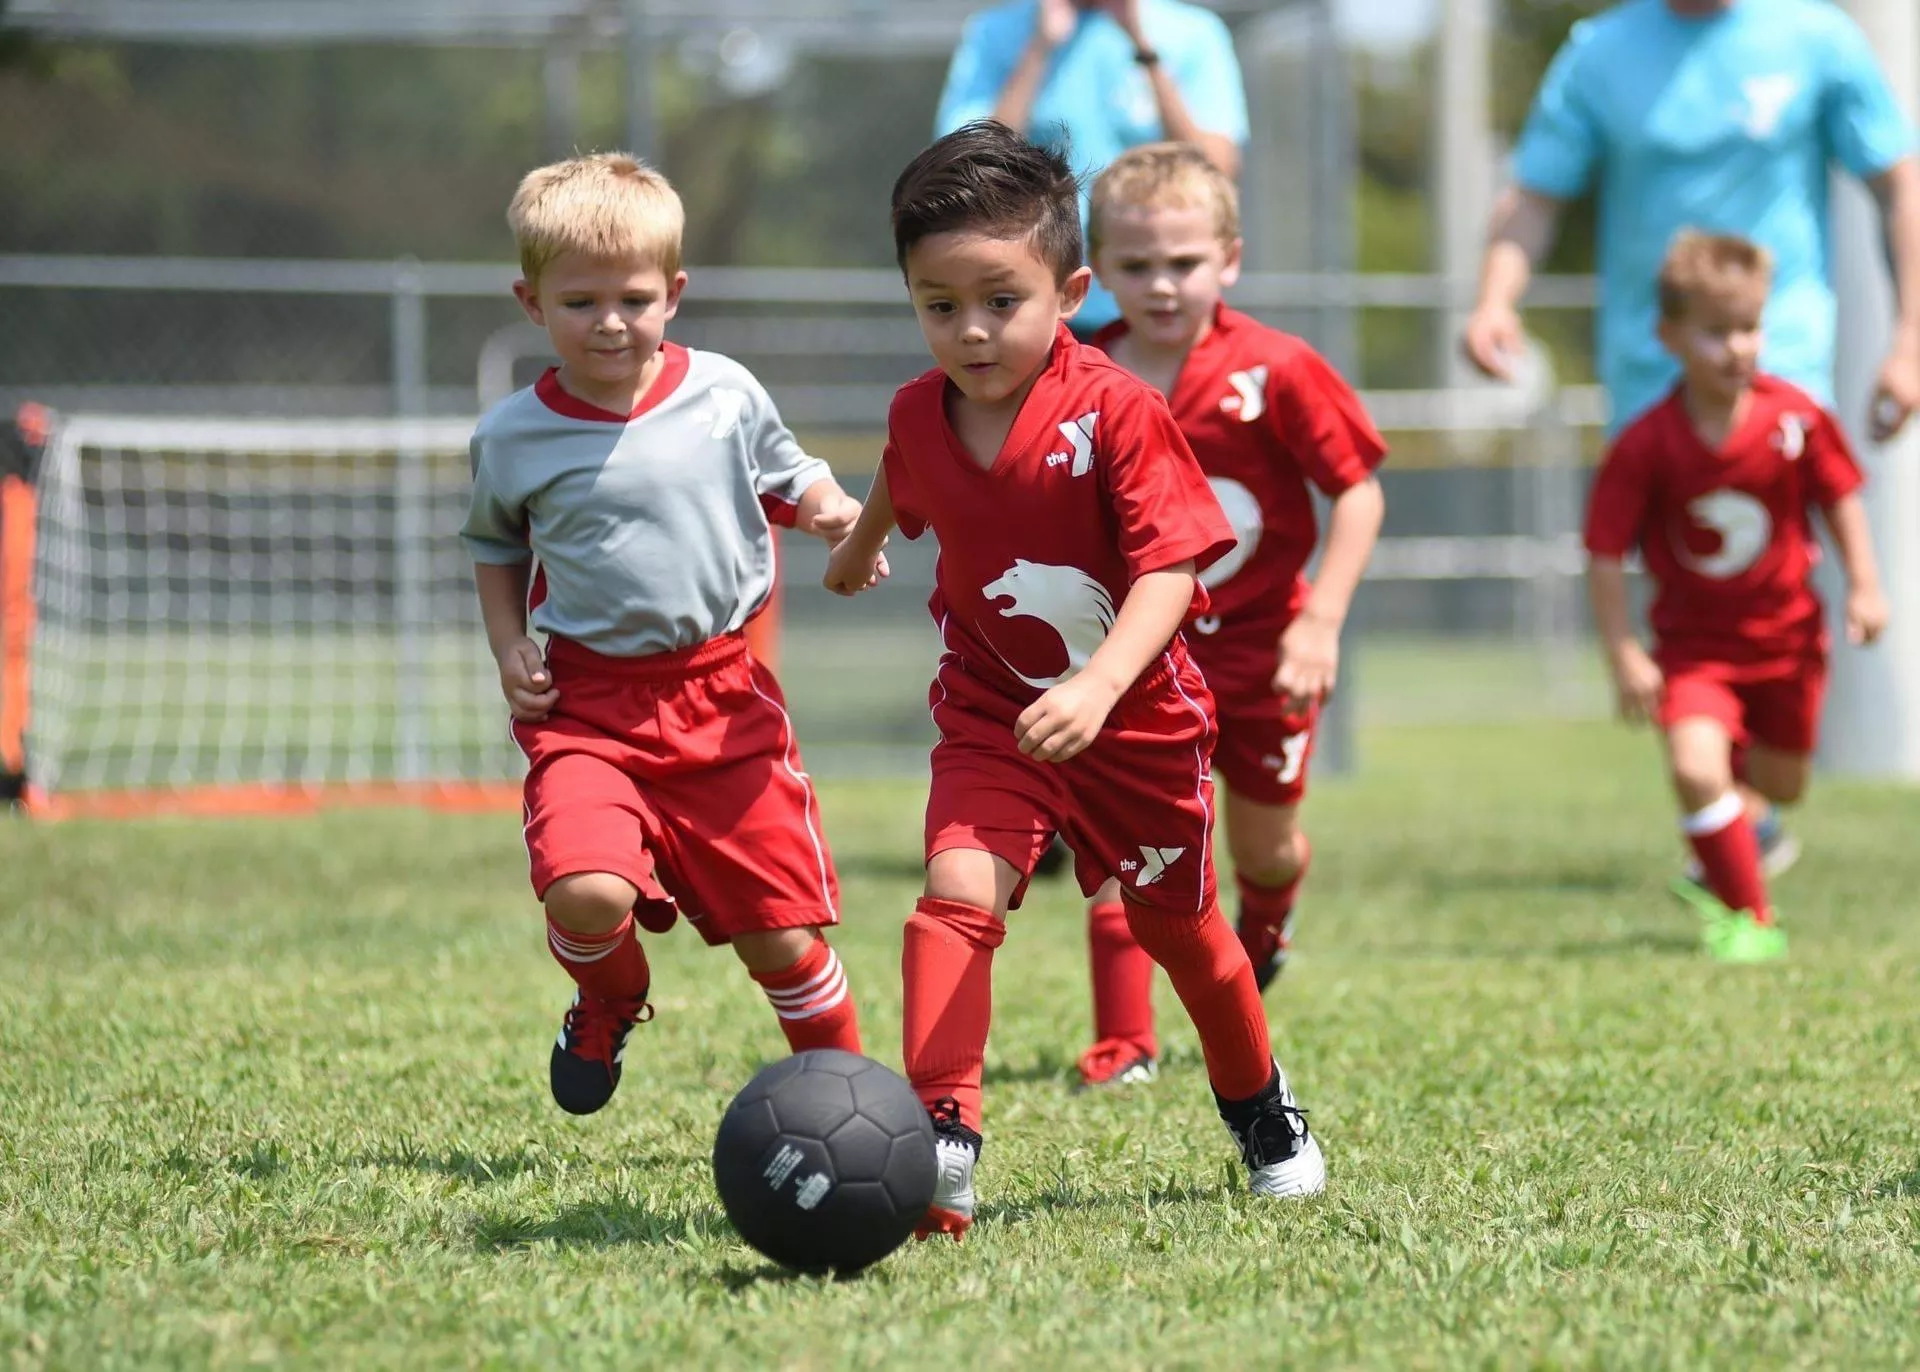 kids playing soccer in red uniforms